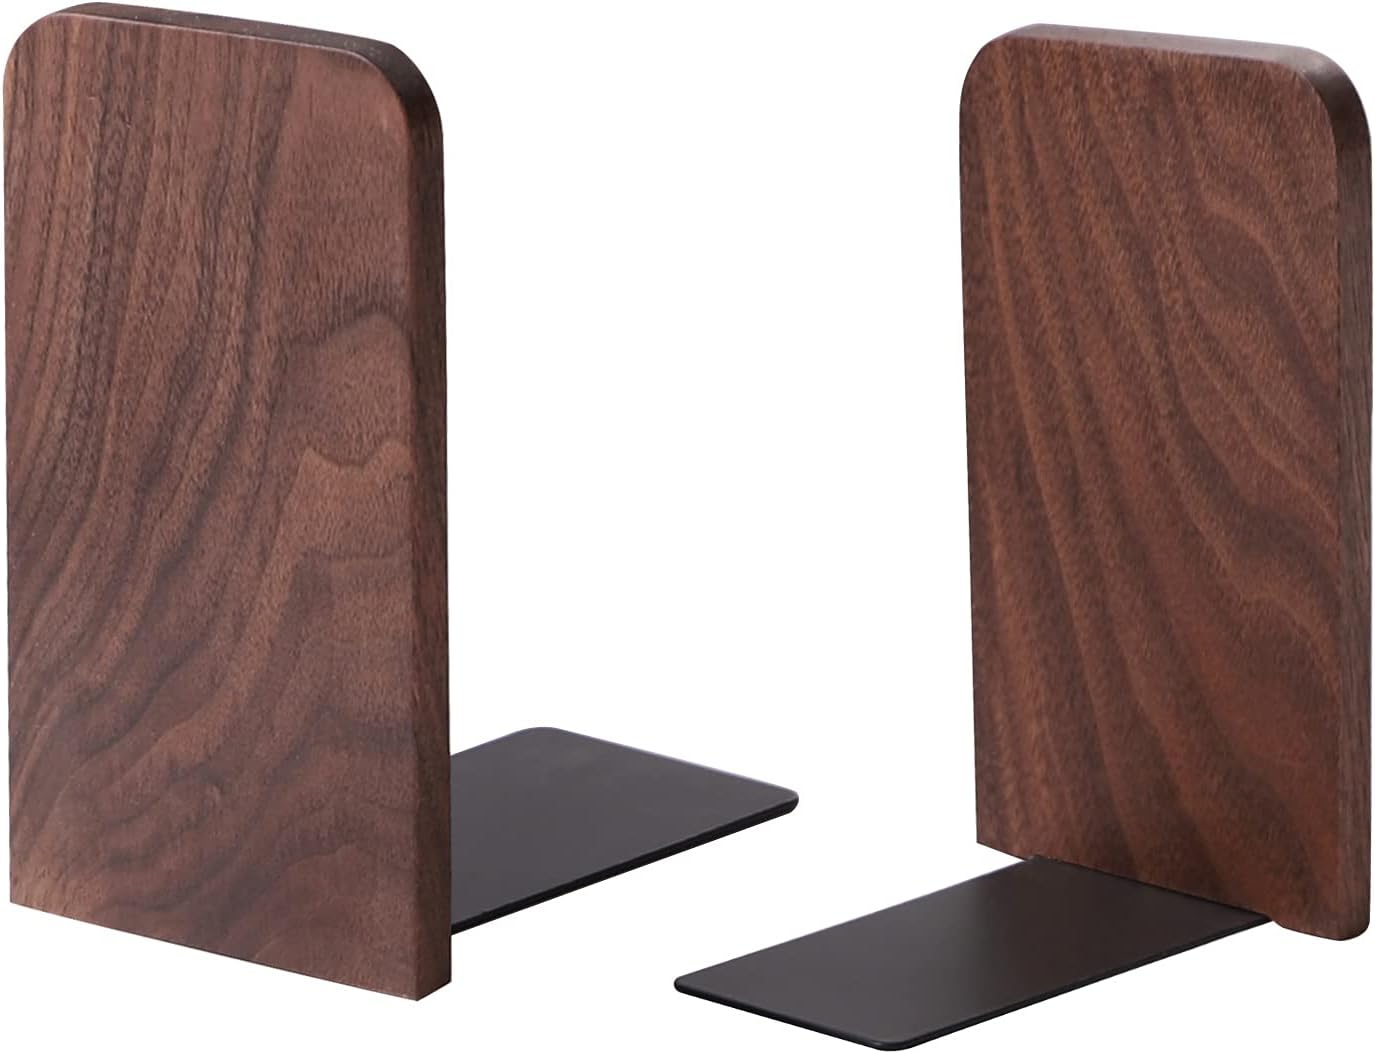 Muso Wood Book Ends for Shelves